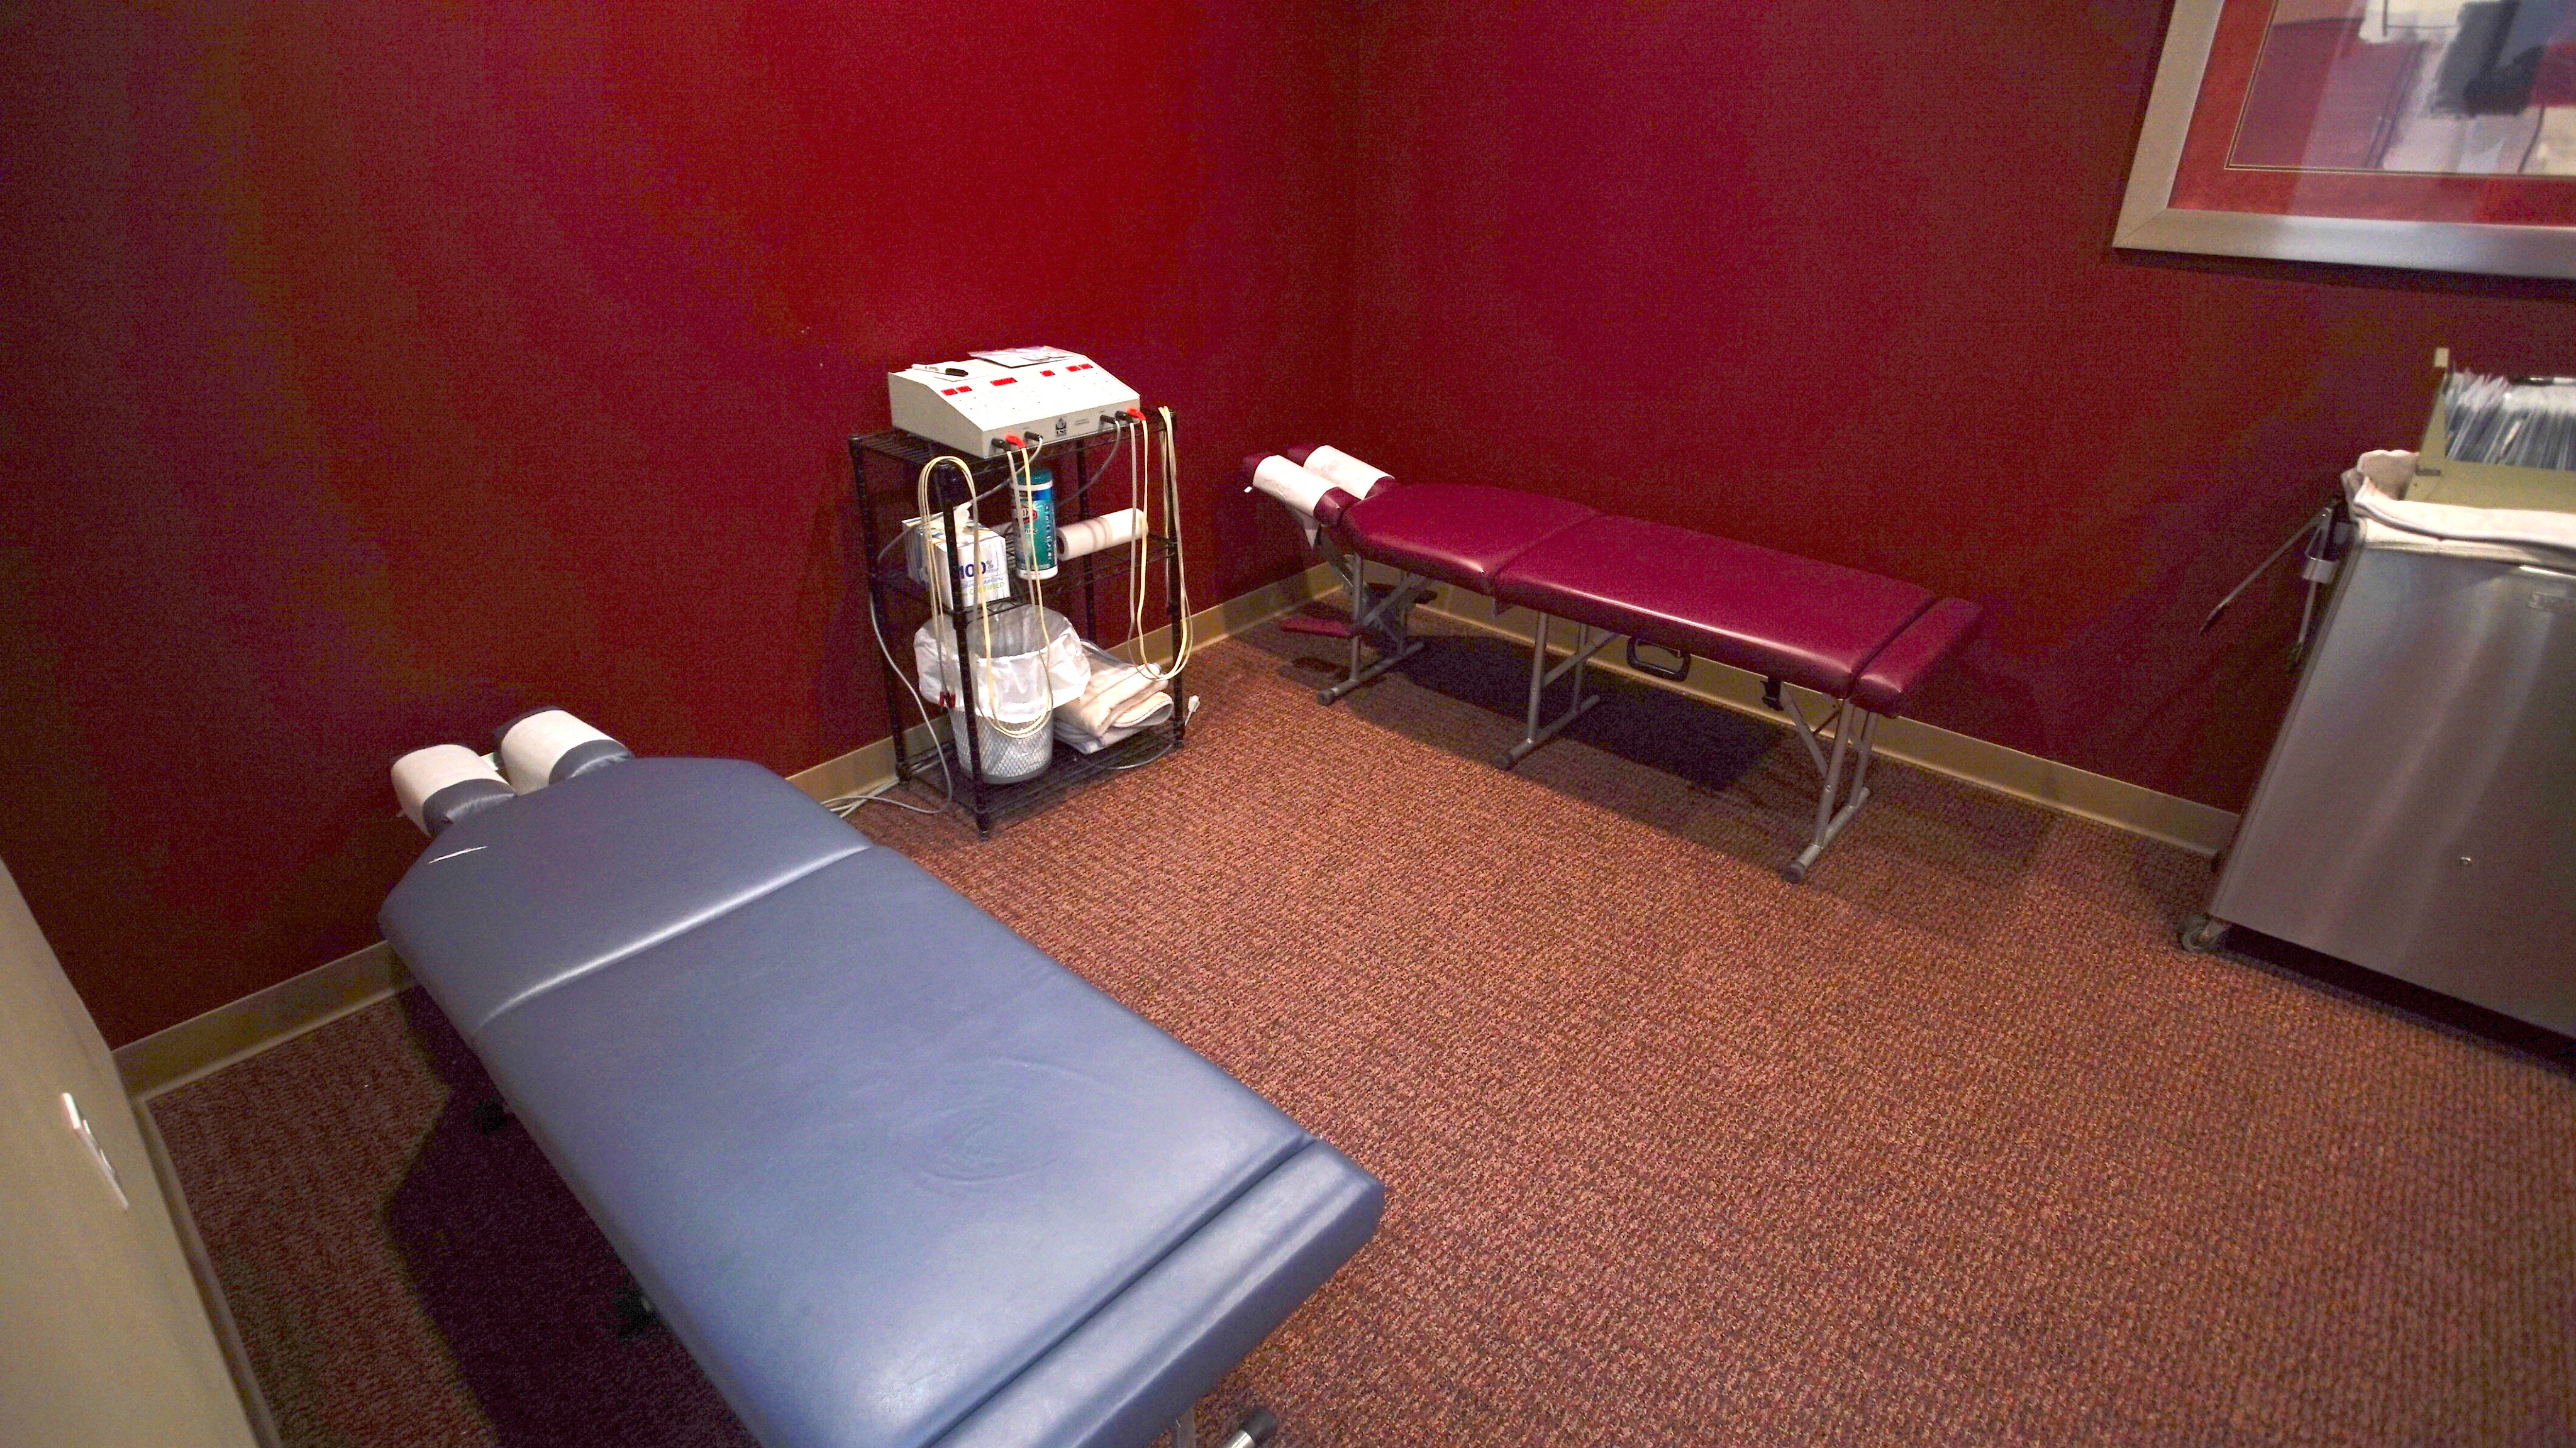 Therapy treatment room with tables and physical therapy machines